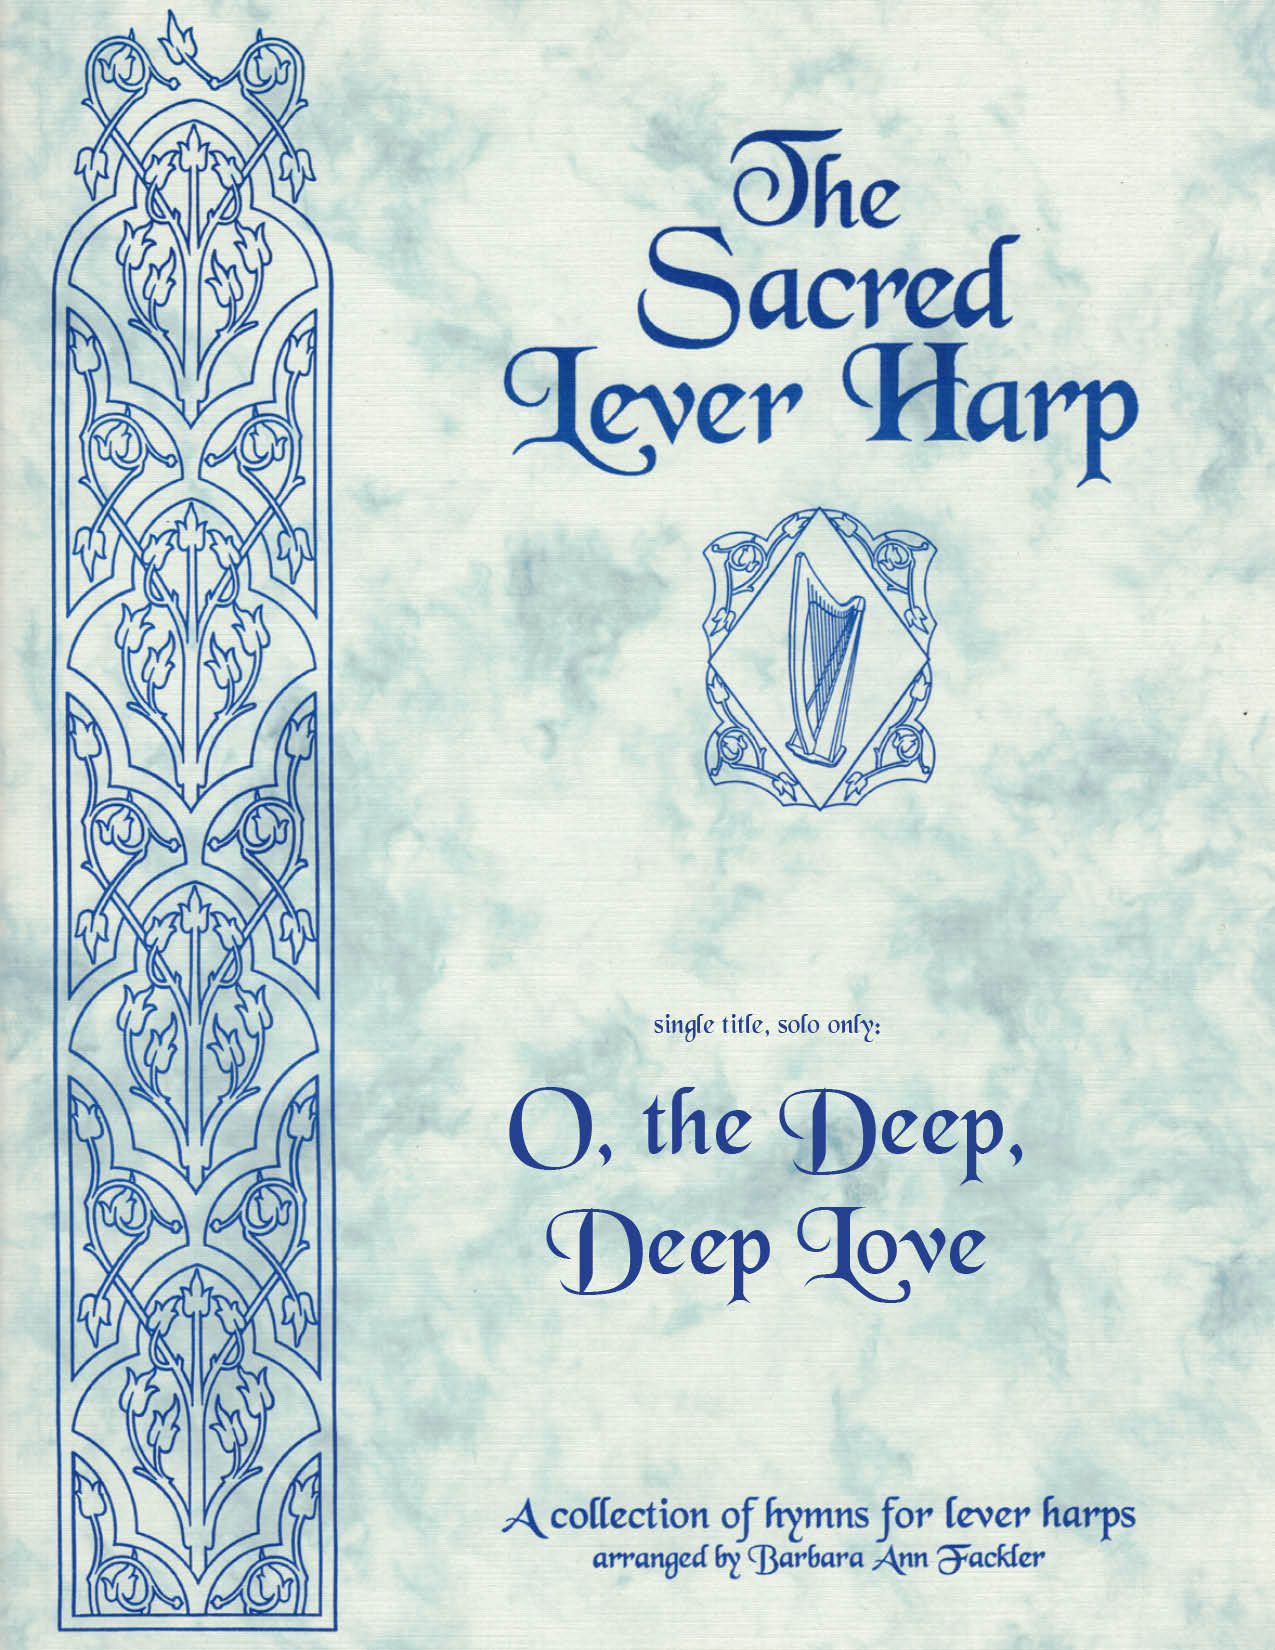 The Sacred Lever Harp, sacred solos for lever harp by Barbara Ann Fackler, O, THE DEEP, DEEP LOVE 